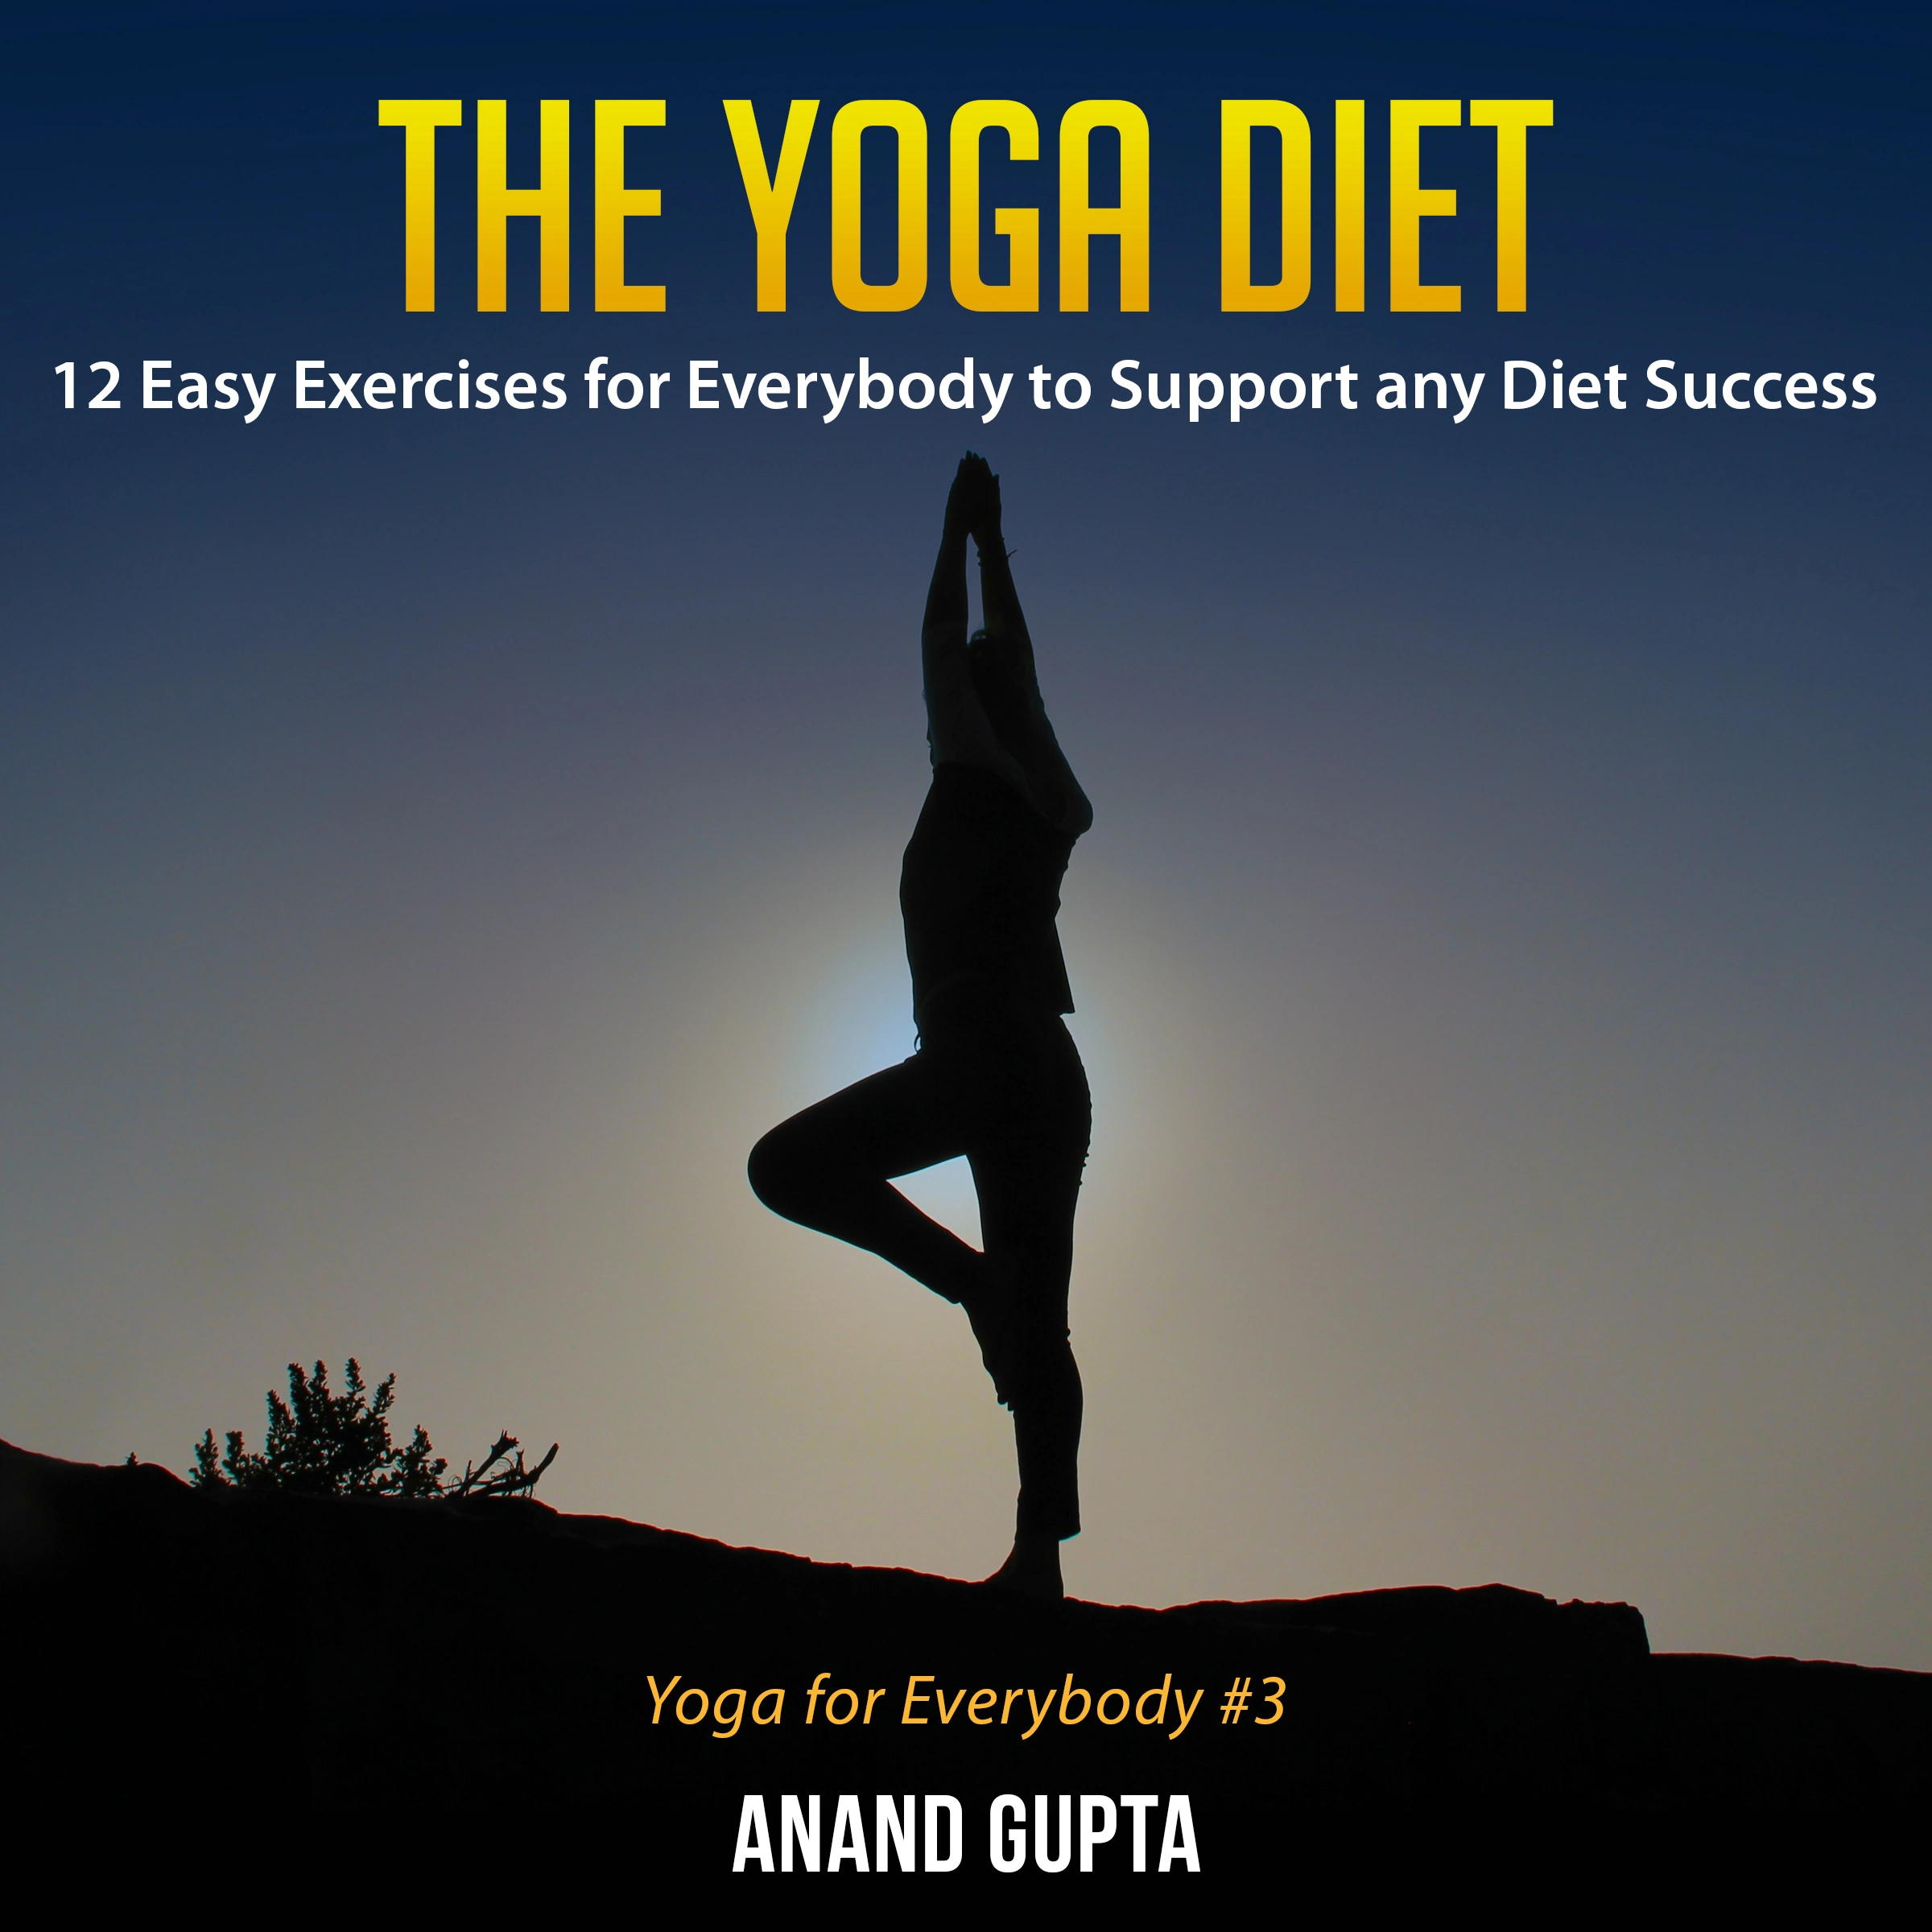 The Yoga Diet Audiobook by Anand Gupta